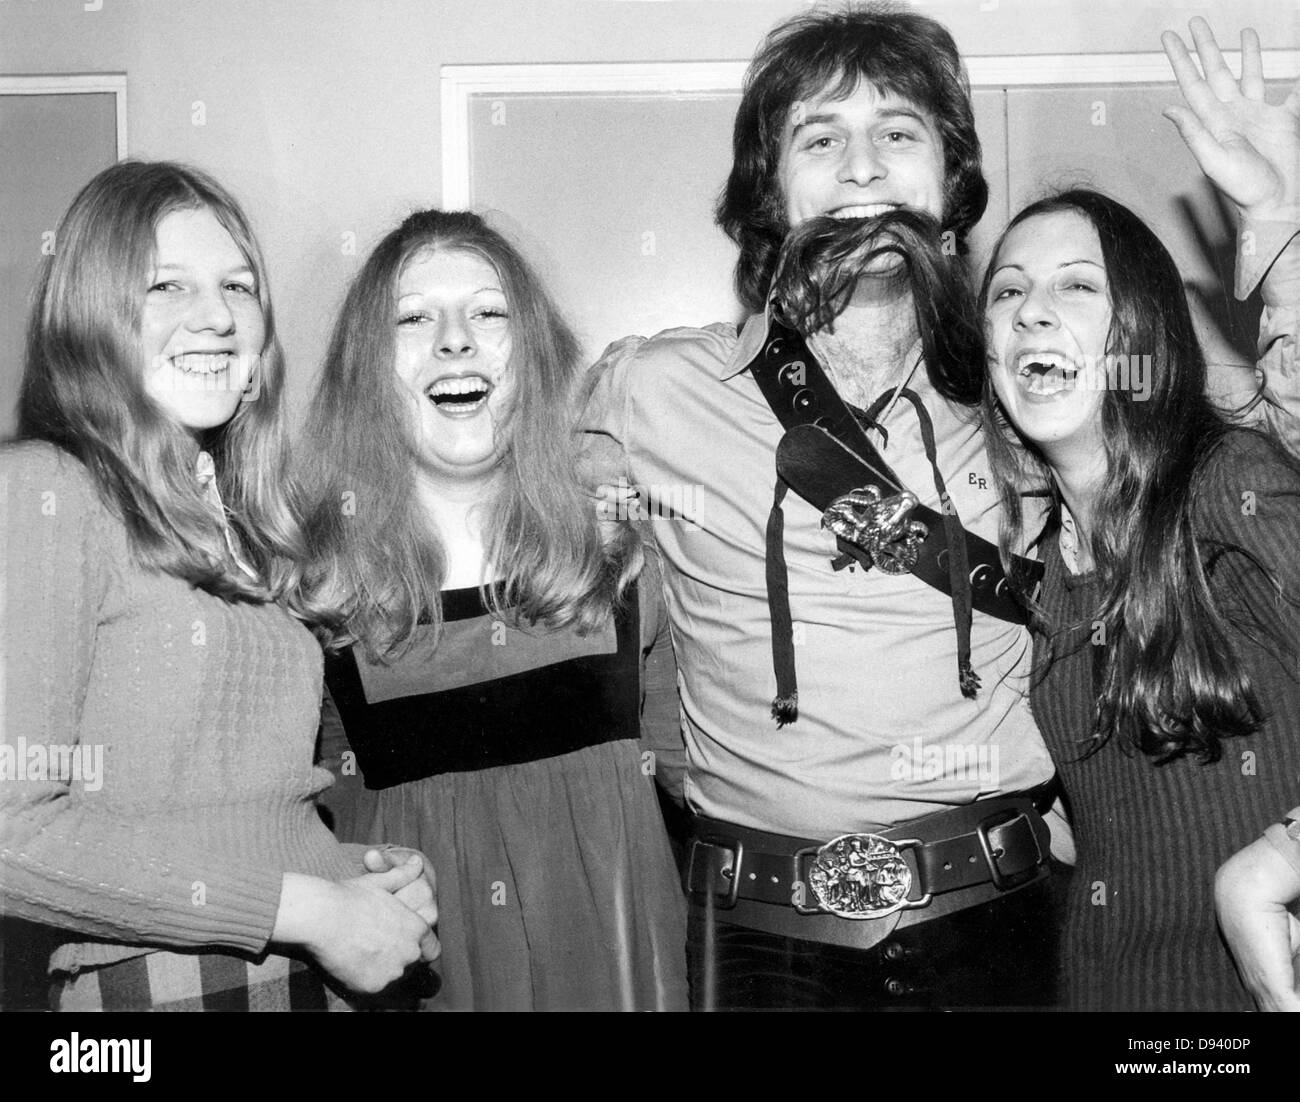 Emperor Rosko with local girls wile appearing at the Terry Heath's Town House in Wellington Uk 1969 Stock Photo